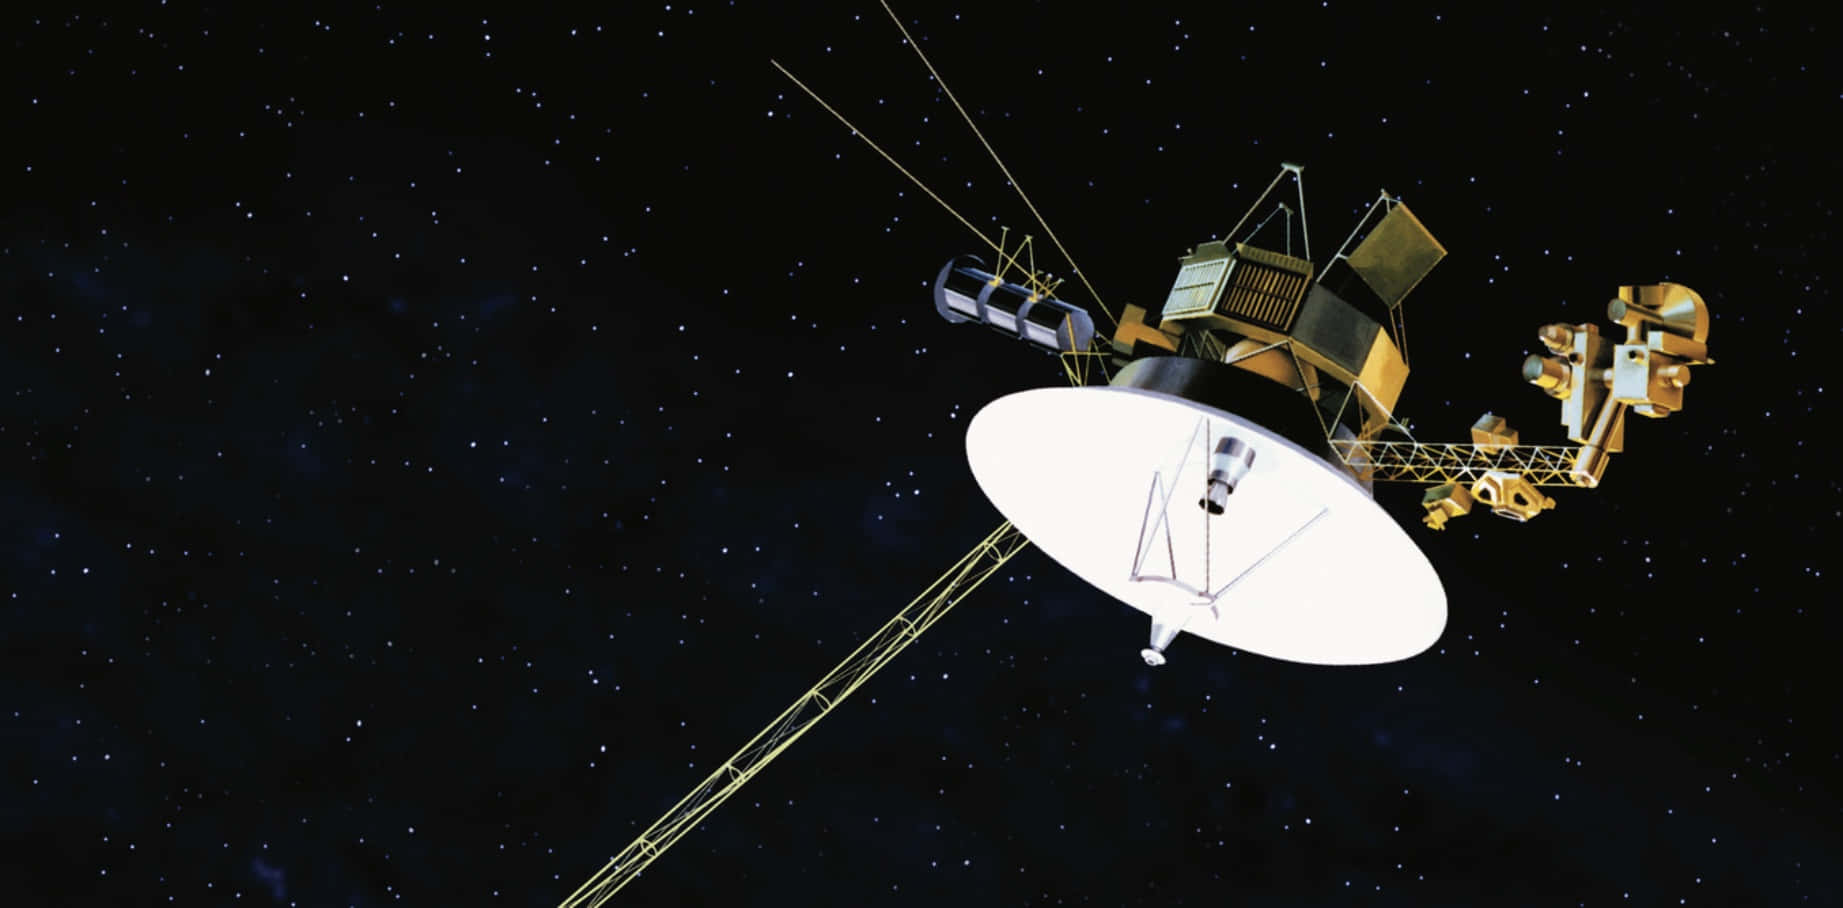 Explore the vast beauty of outer space with Voyager 1